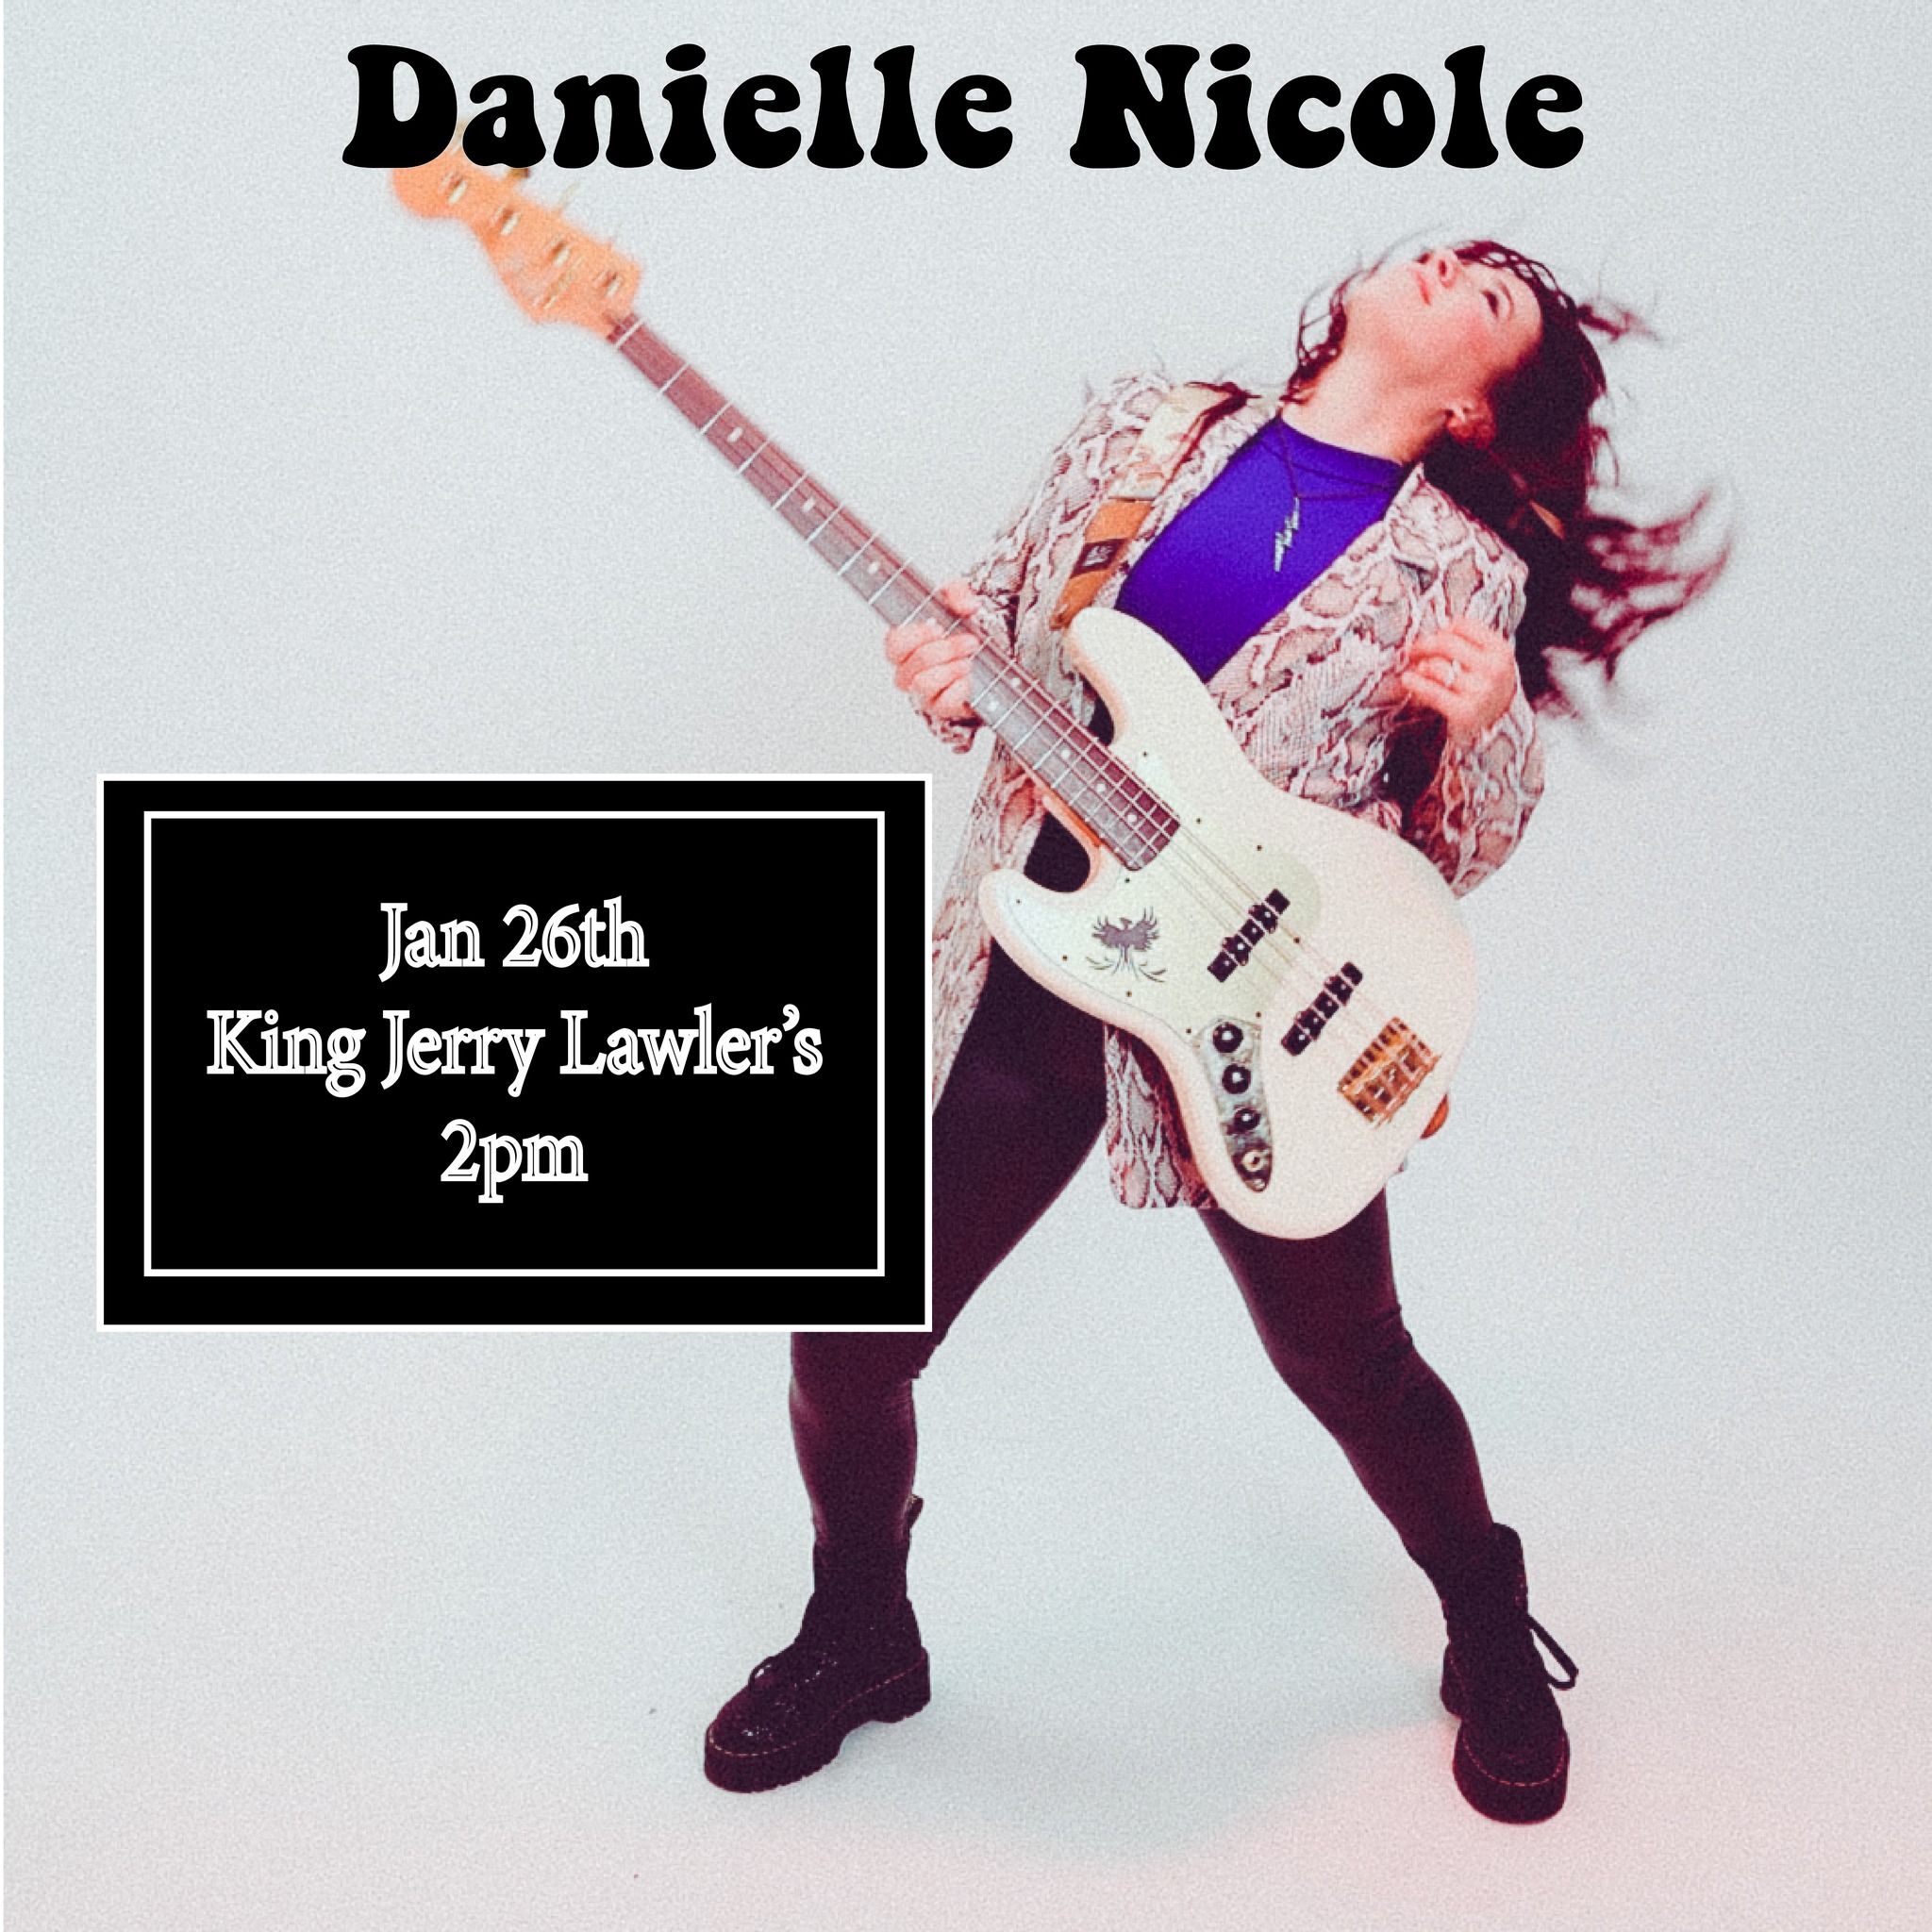 Danielle Nicole playing her bass with a sign for the workshop time and location